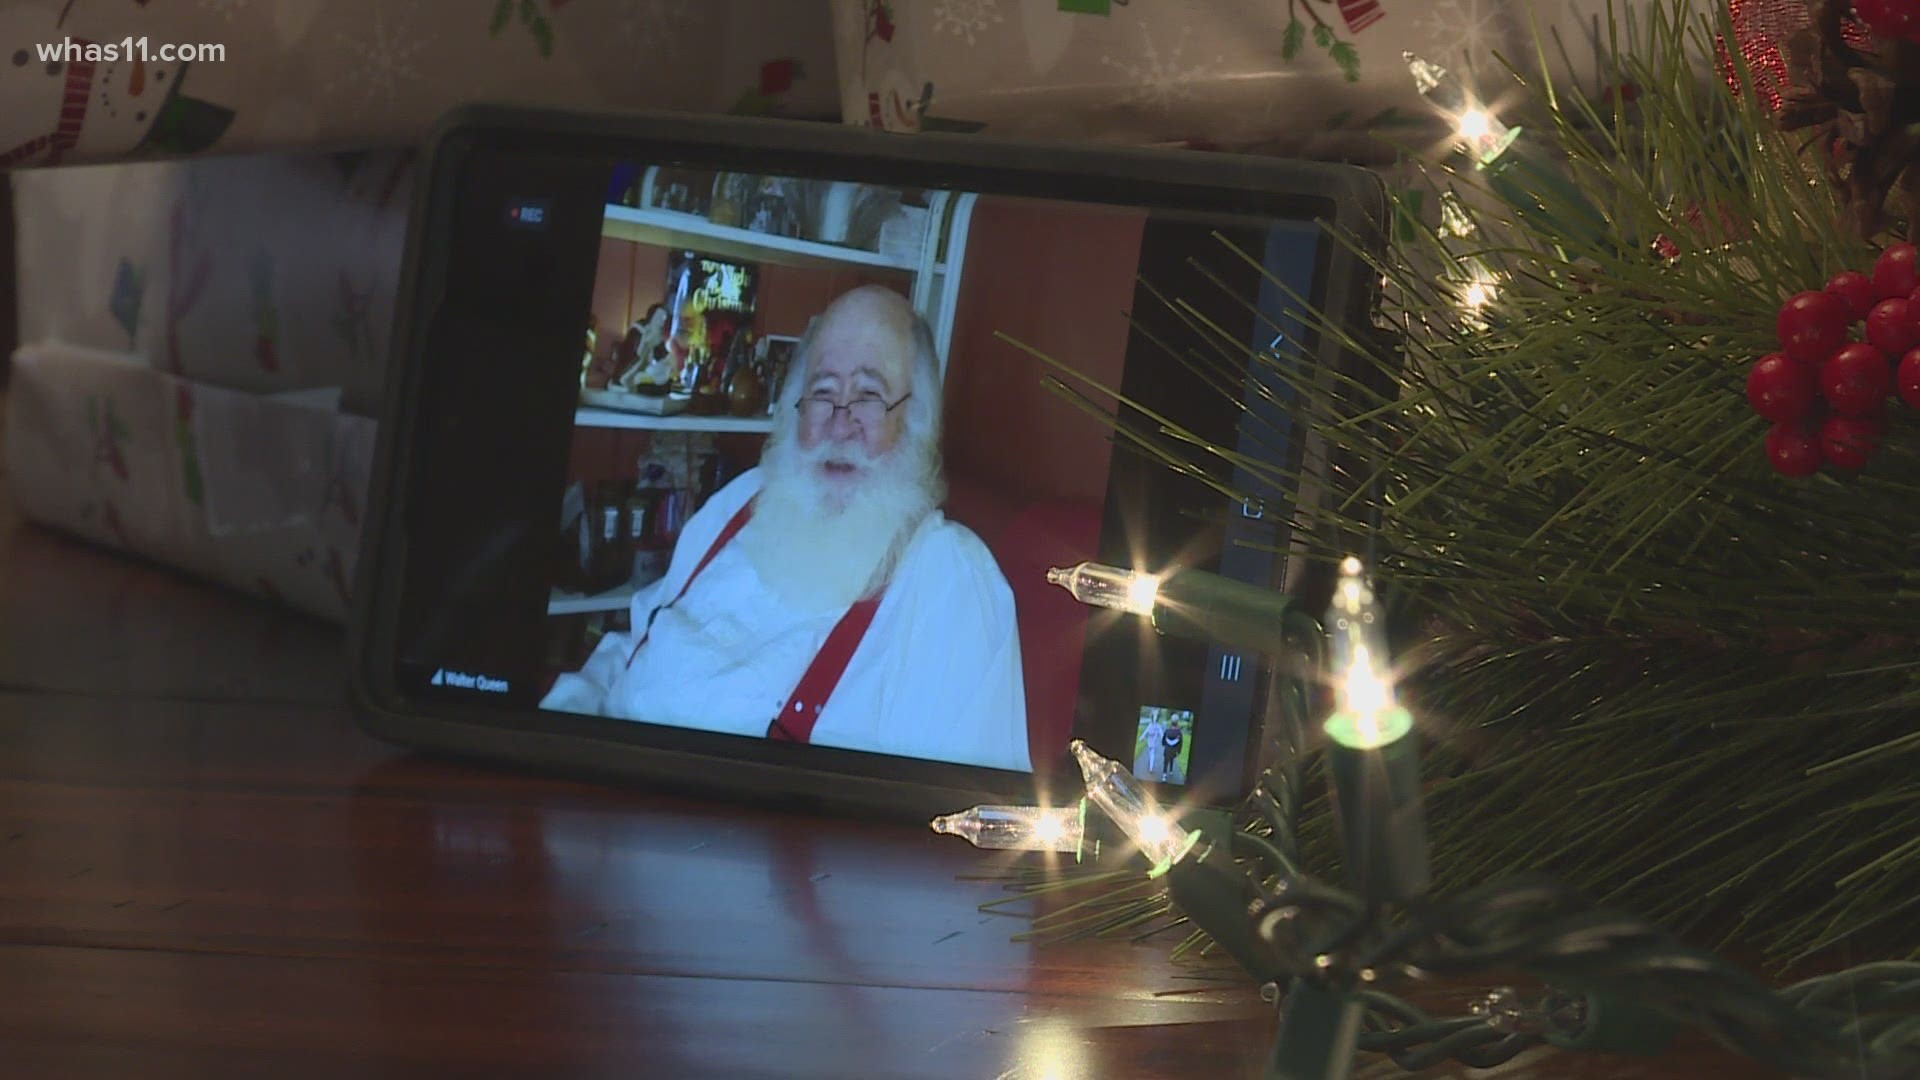 While things will be different in 2020, Santa is still bringing his magic to town - even through Zoom.